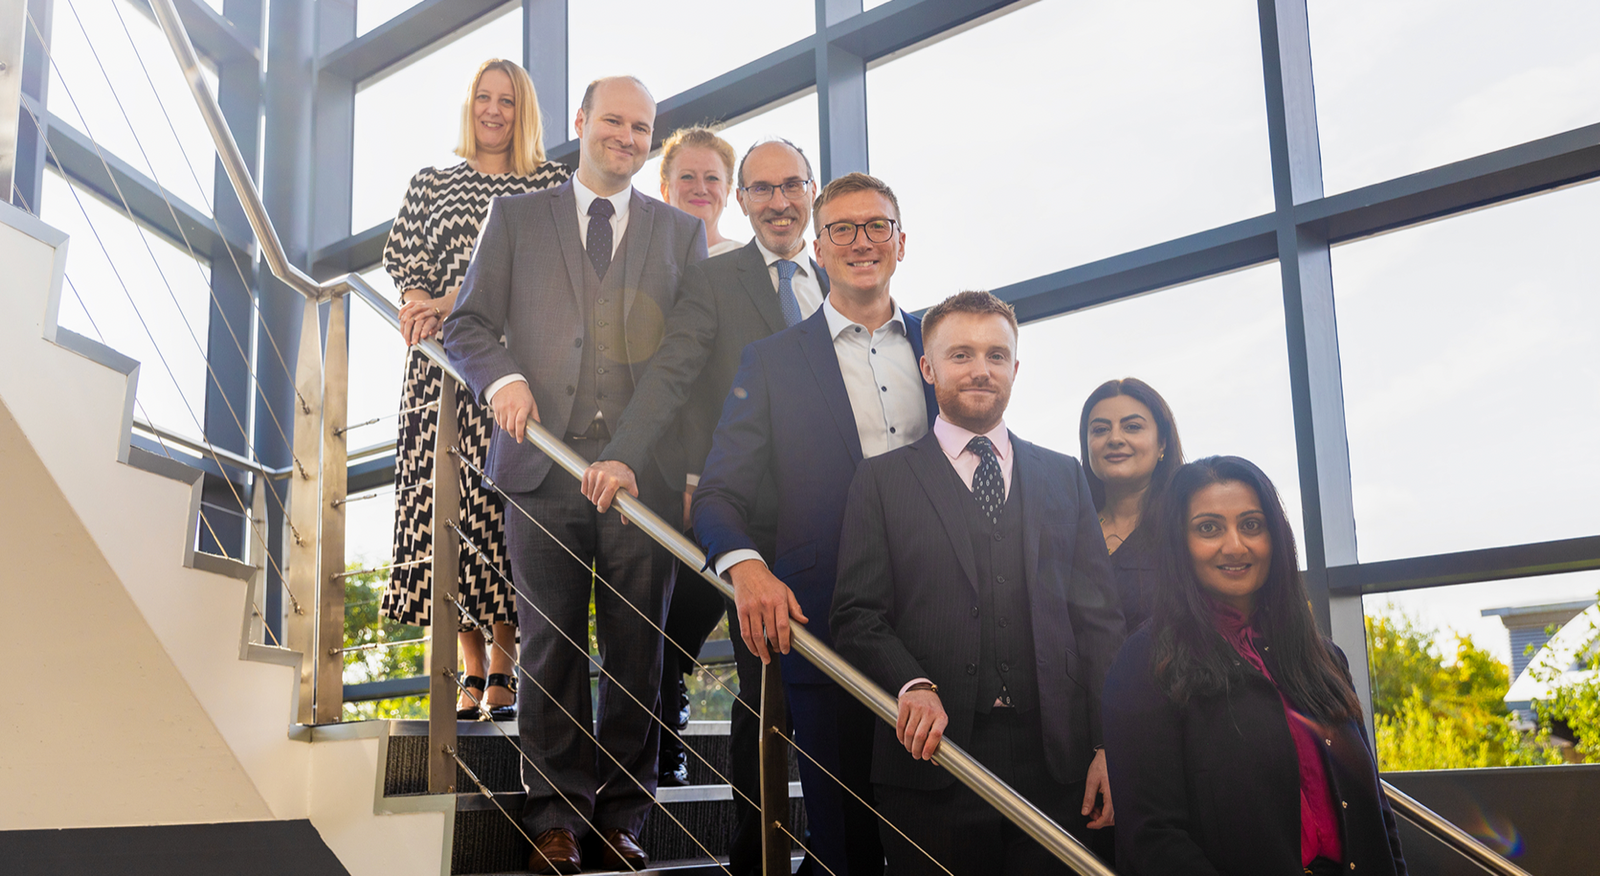 Yorkshire Law Firm, Chadwick Lawrence Introduces a Tailored Equity Scheme